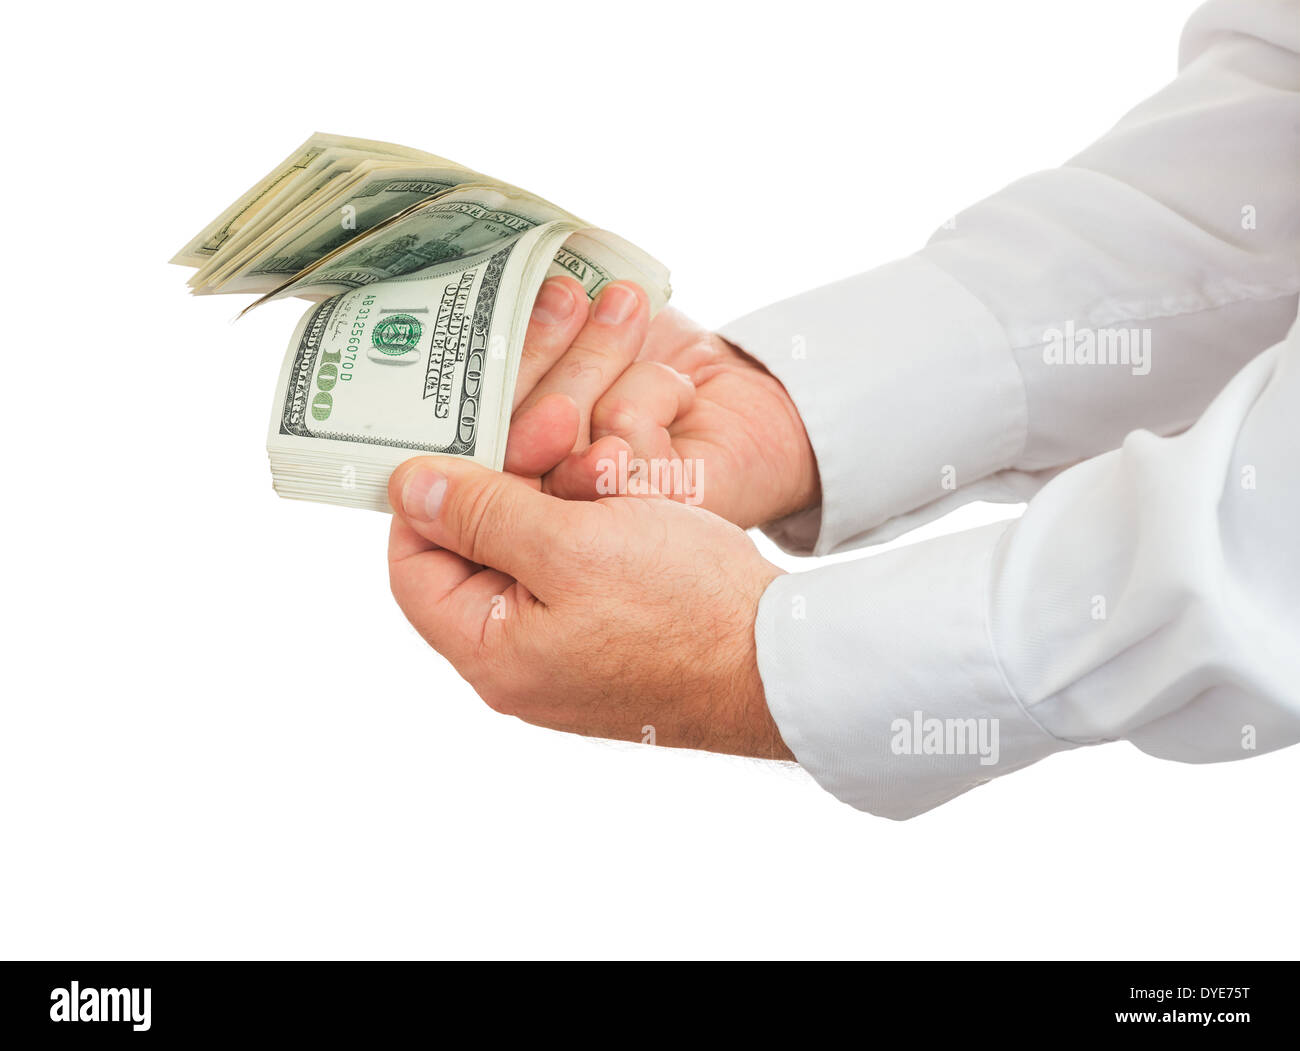 hands of businessman holding and counting money isolated on white background Stock Photo